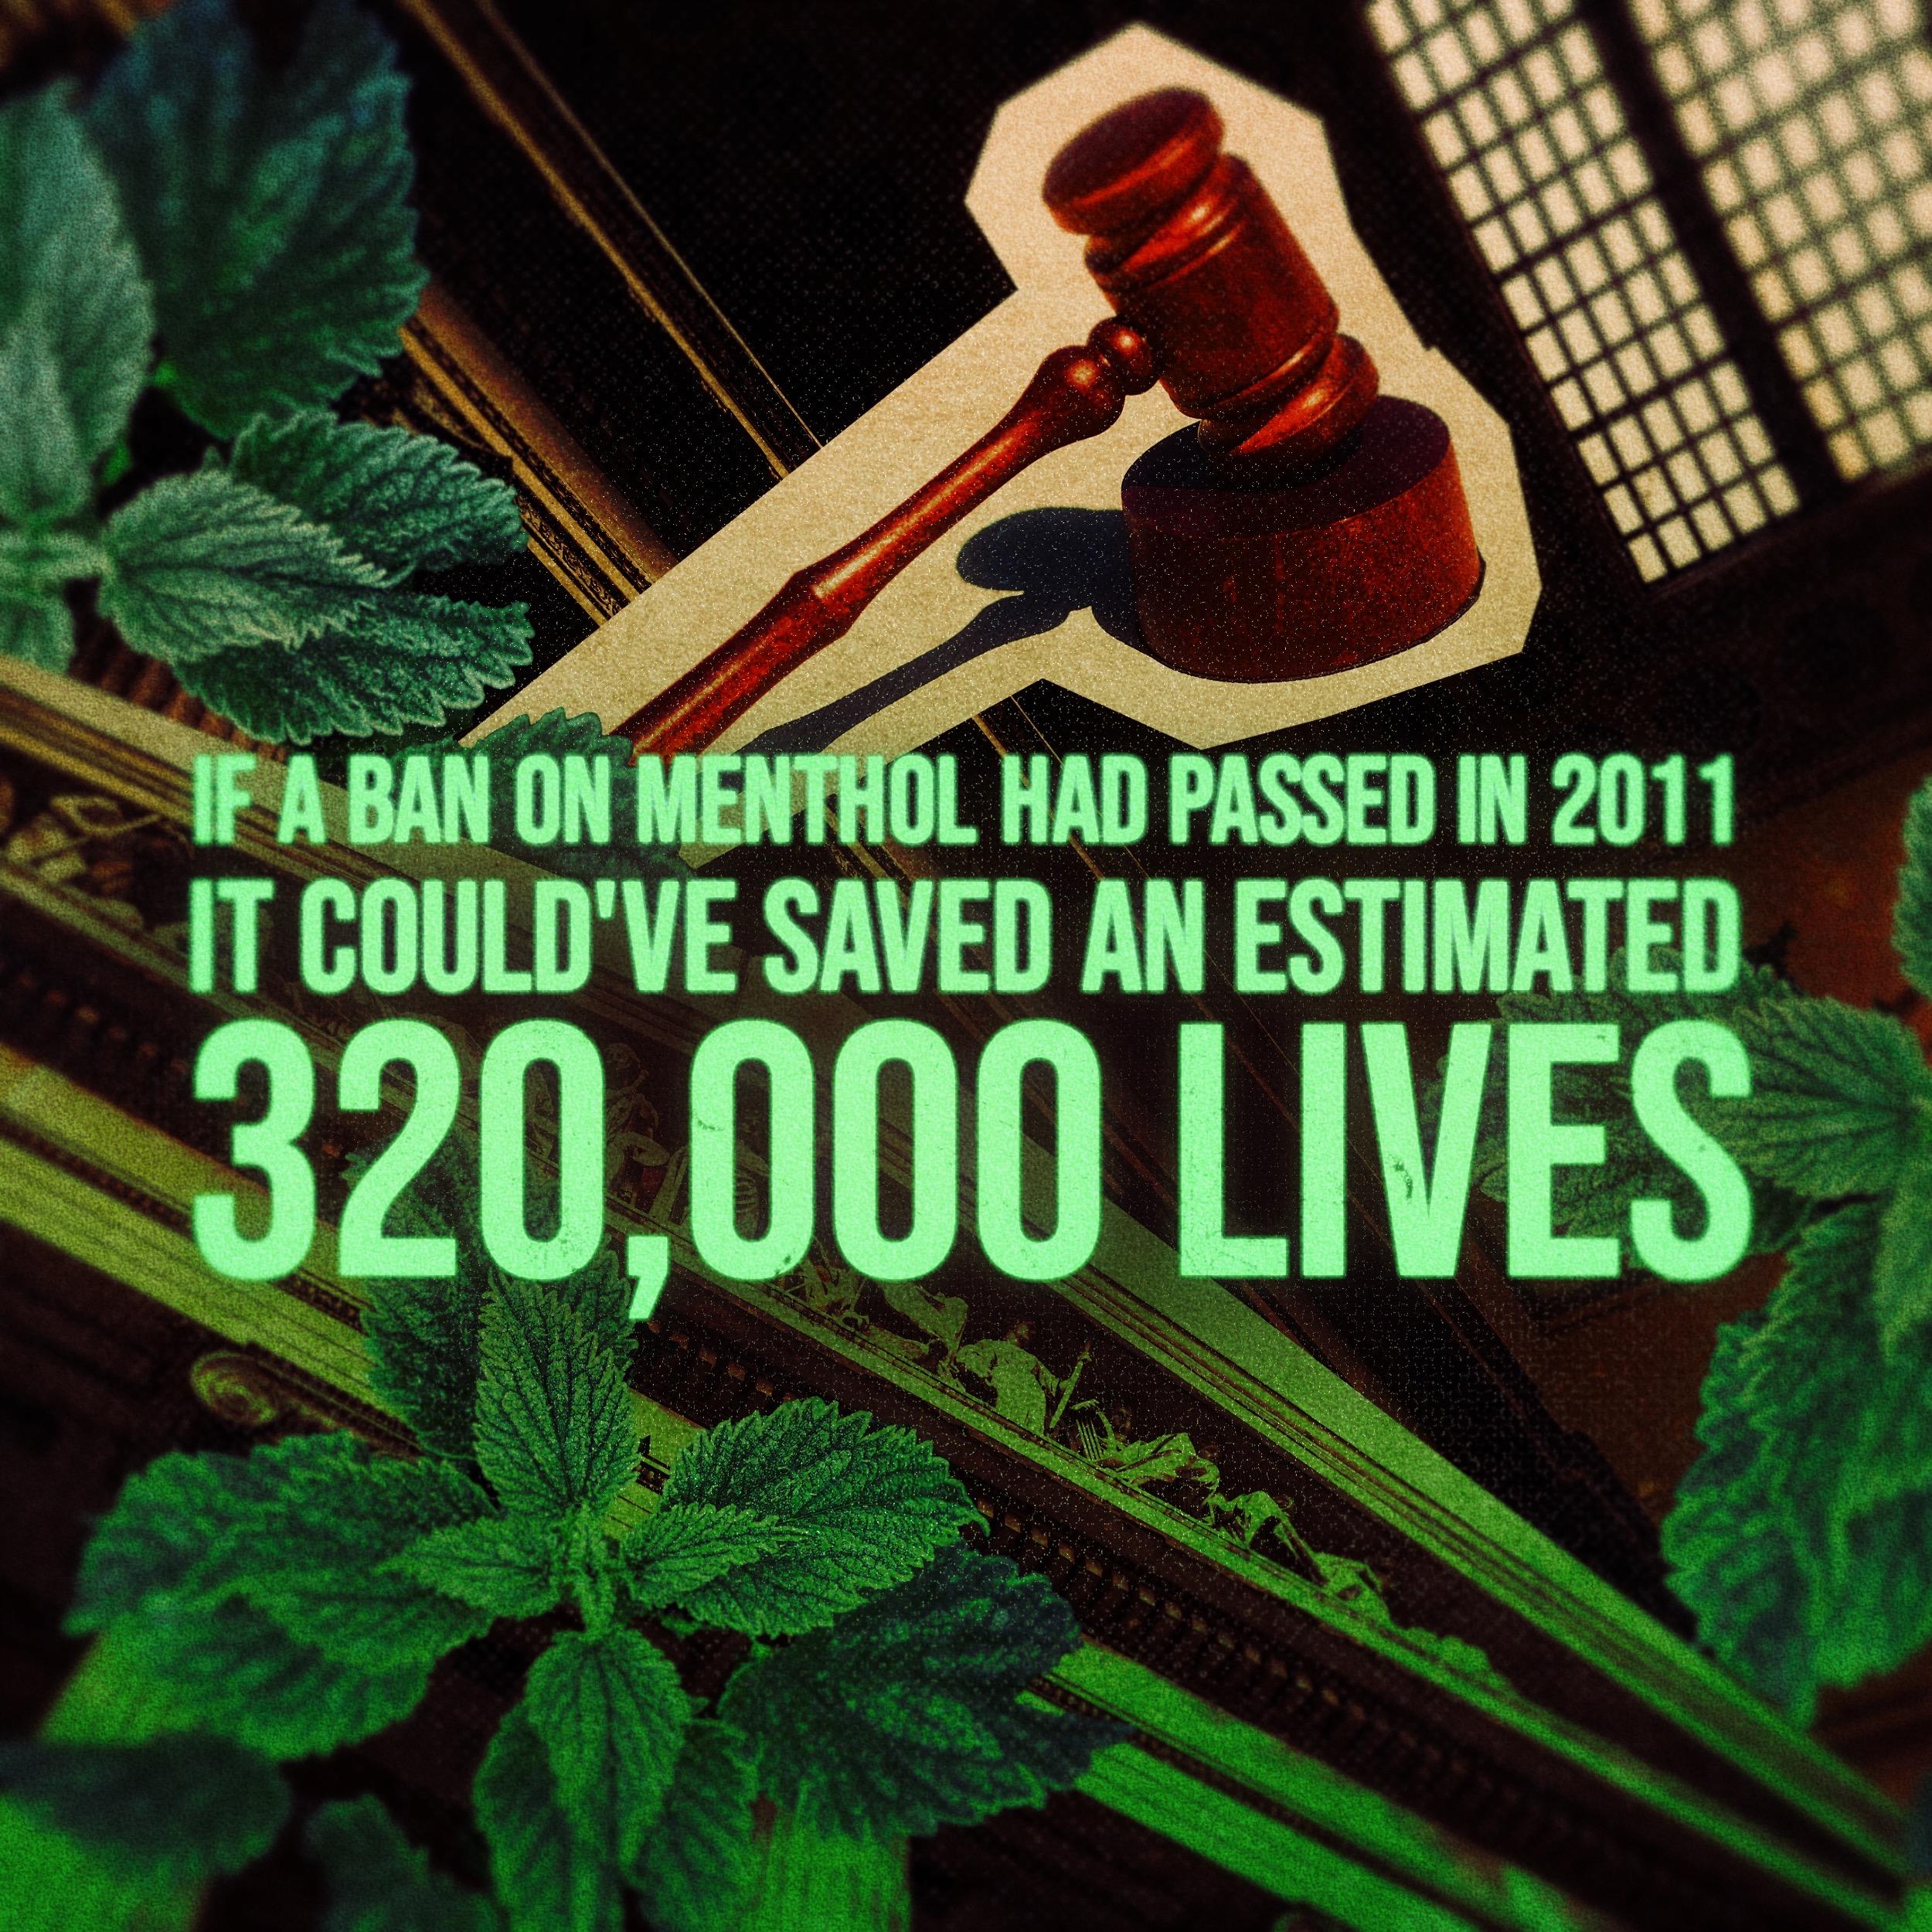 If a ban on menthol had passed in 2011 it could've saved an estimated 320,000 lives.